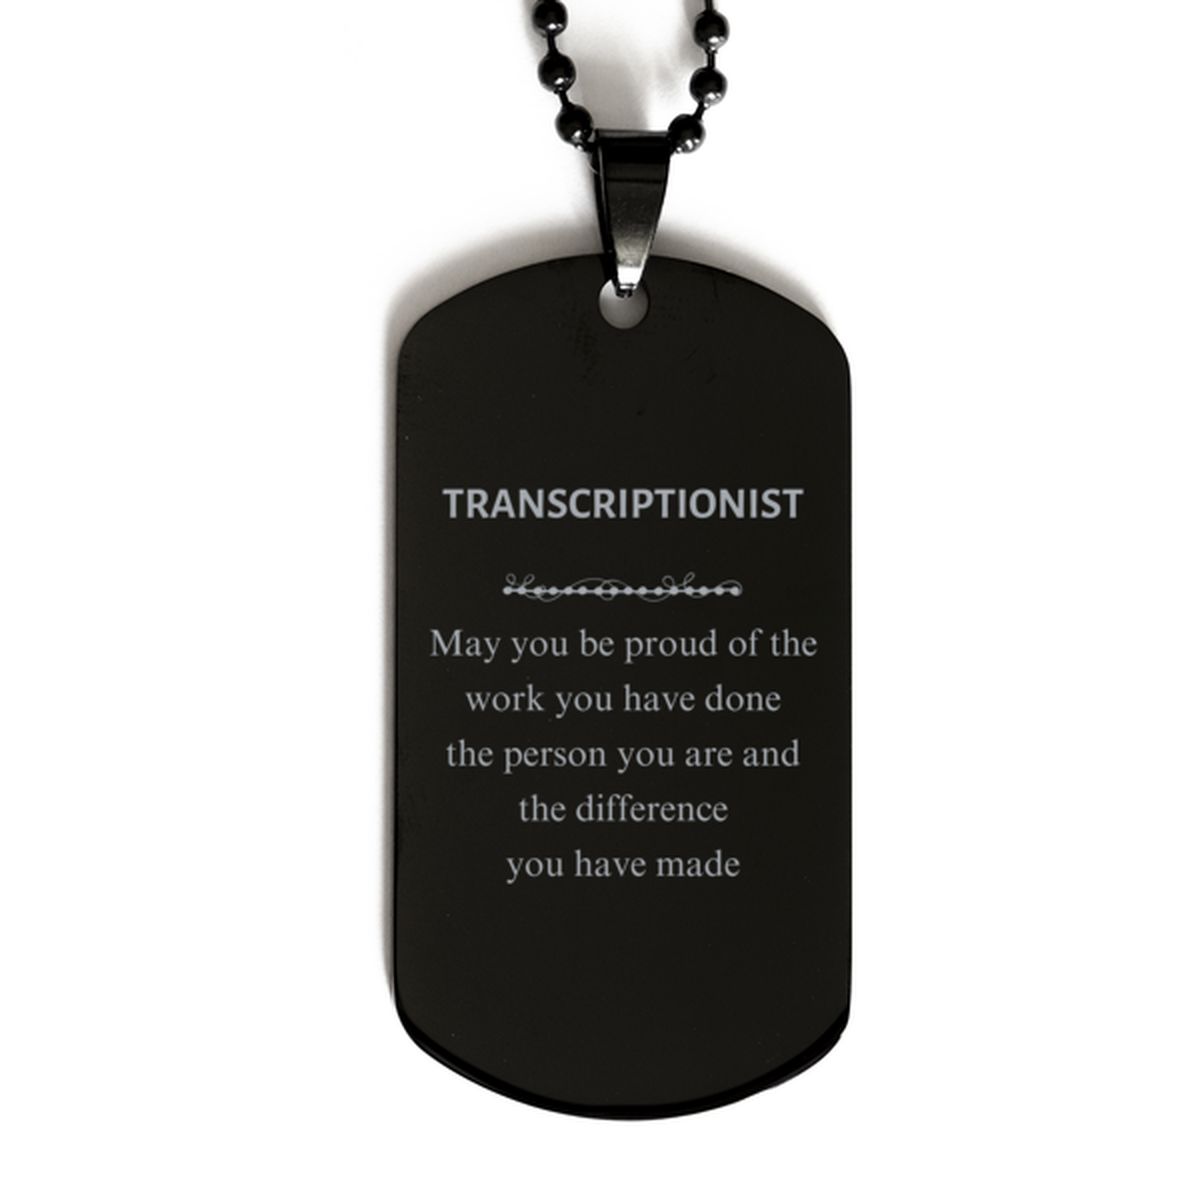 Transcriptionist May you be proud of the work you have done, Retirement Transcriptionist Black Dog Tag for Colleague Appreciation Gifts Amazing for Transcriptionist